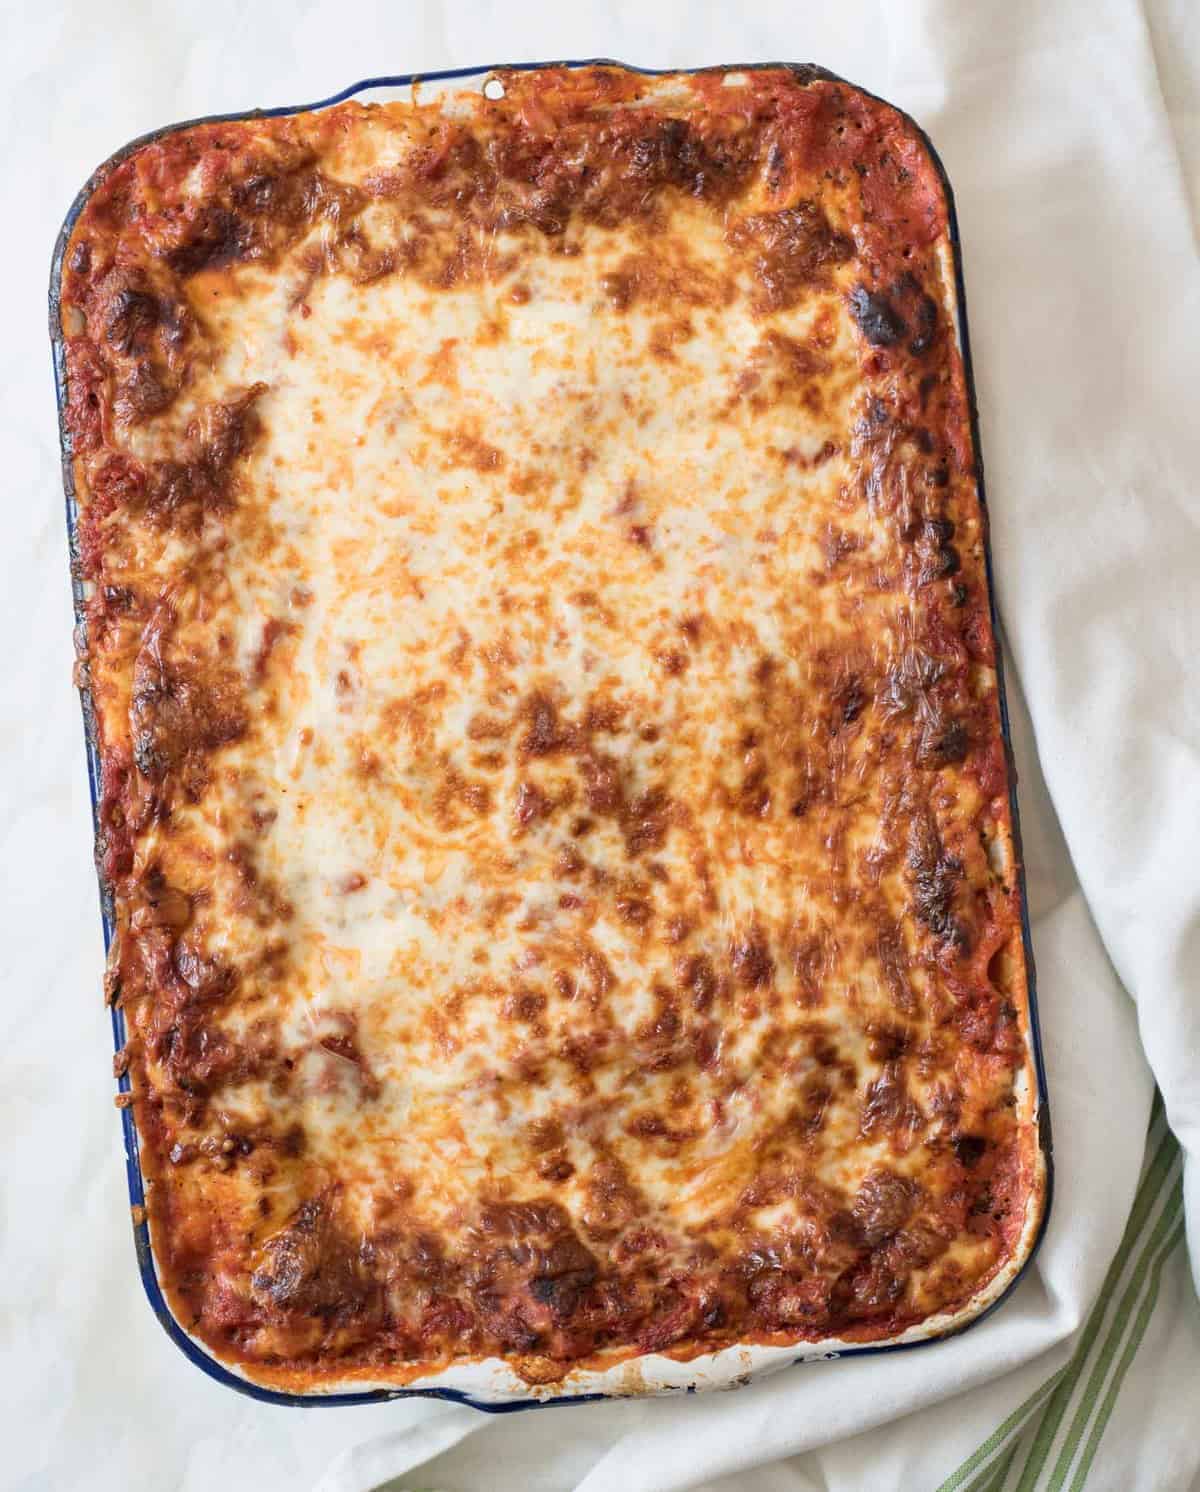 The Best Make-Ahead Lasagna recipe that is also freezer friendly is made with a rich sausage sauce and loads of cheese. This will be your go-to lasagna recipe guaranteed!